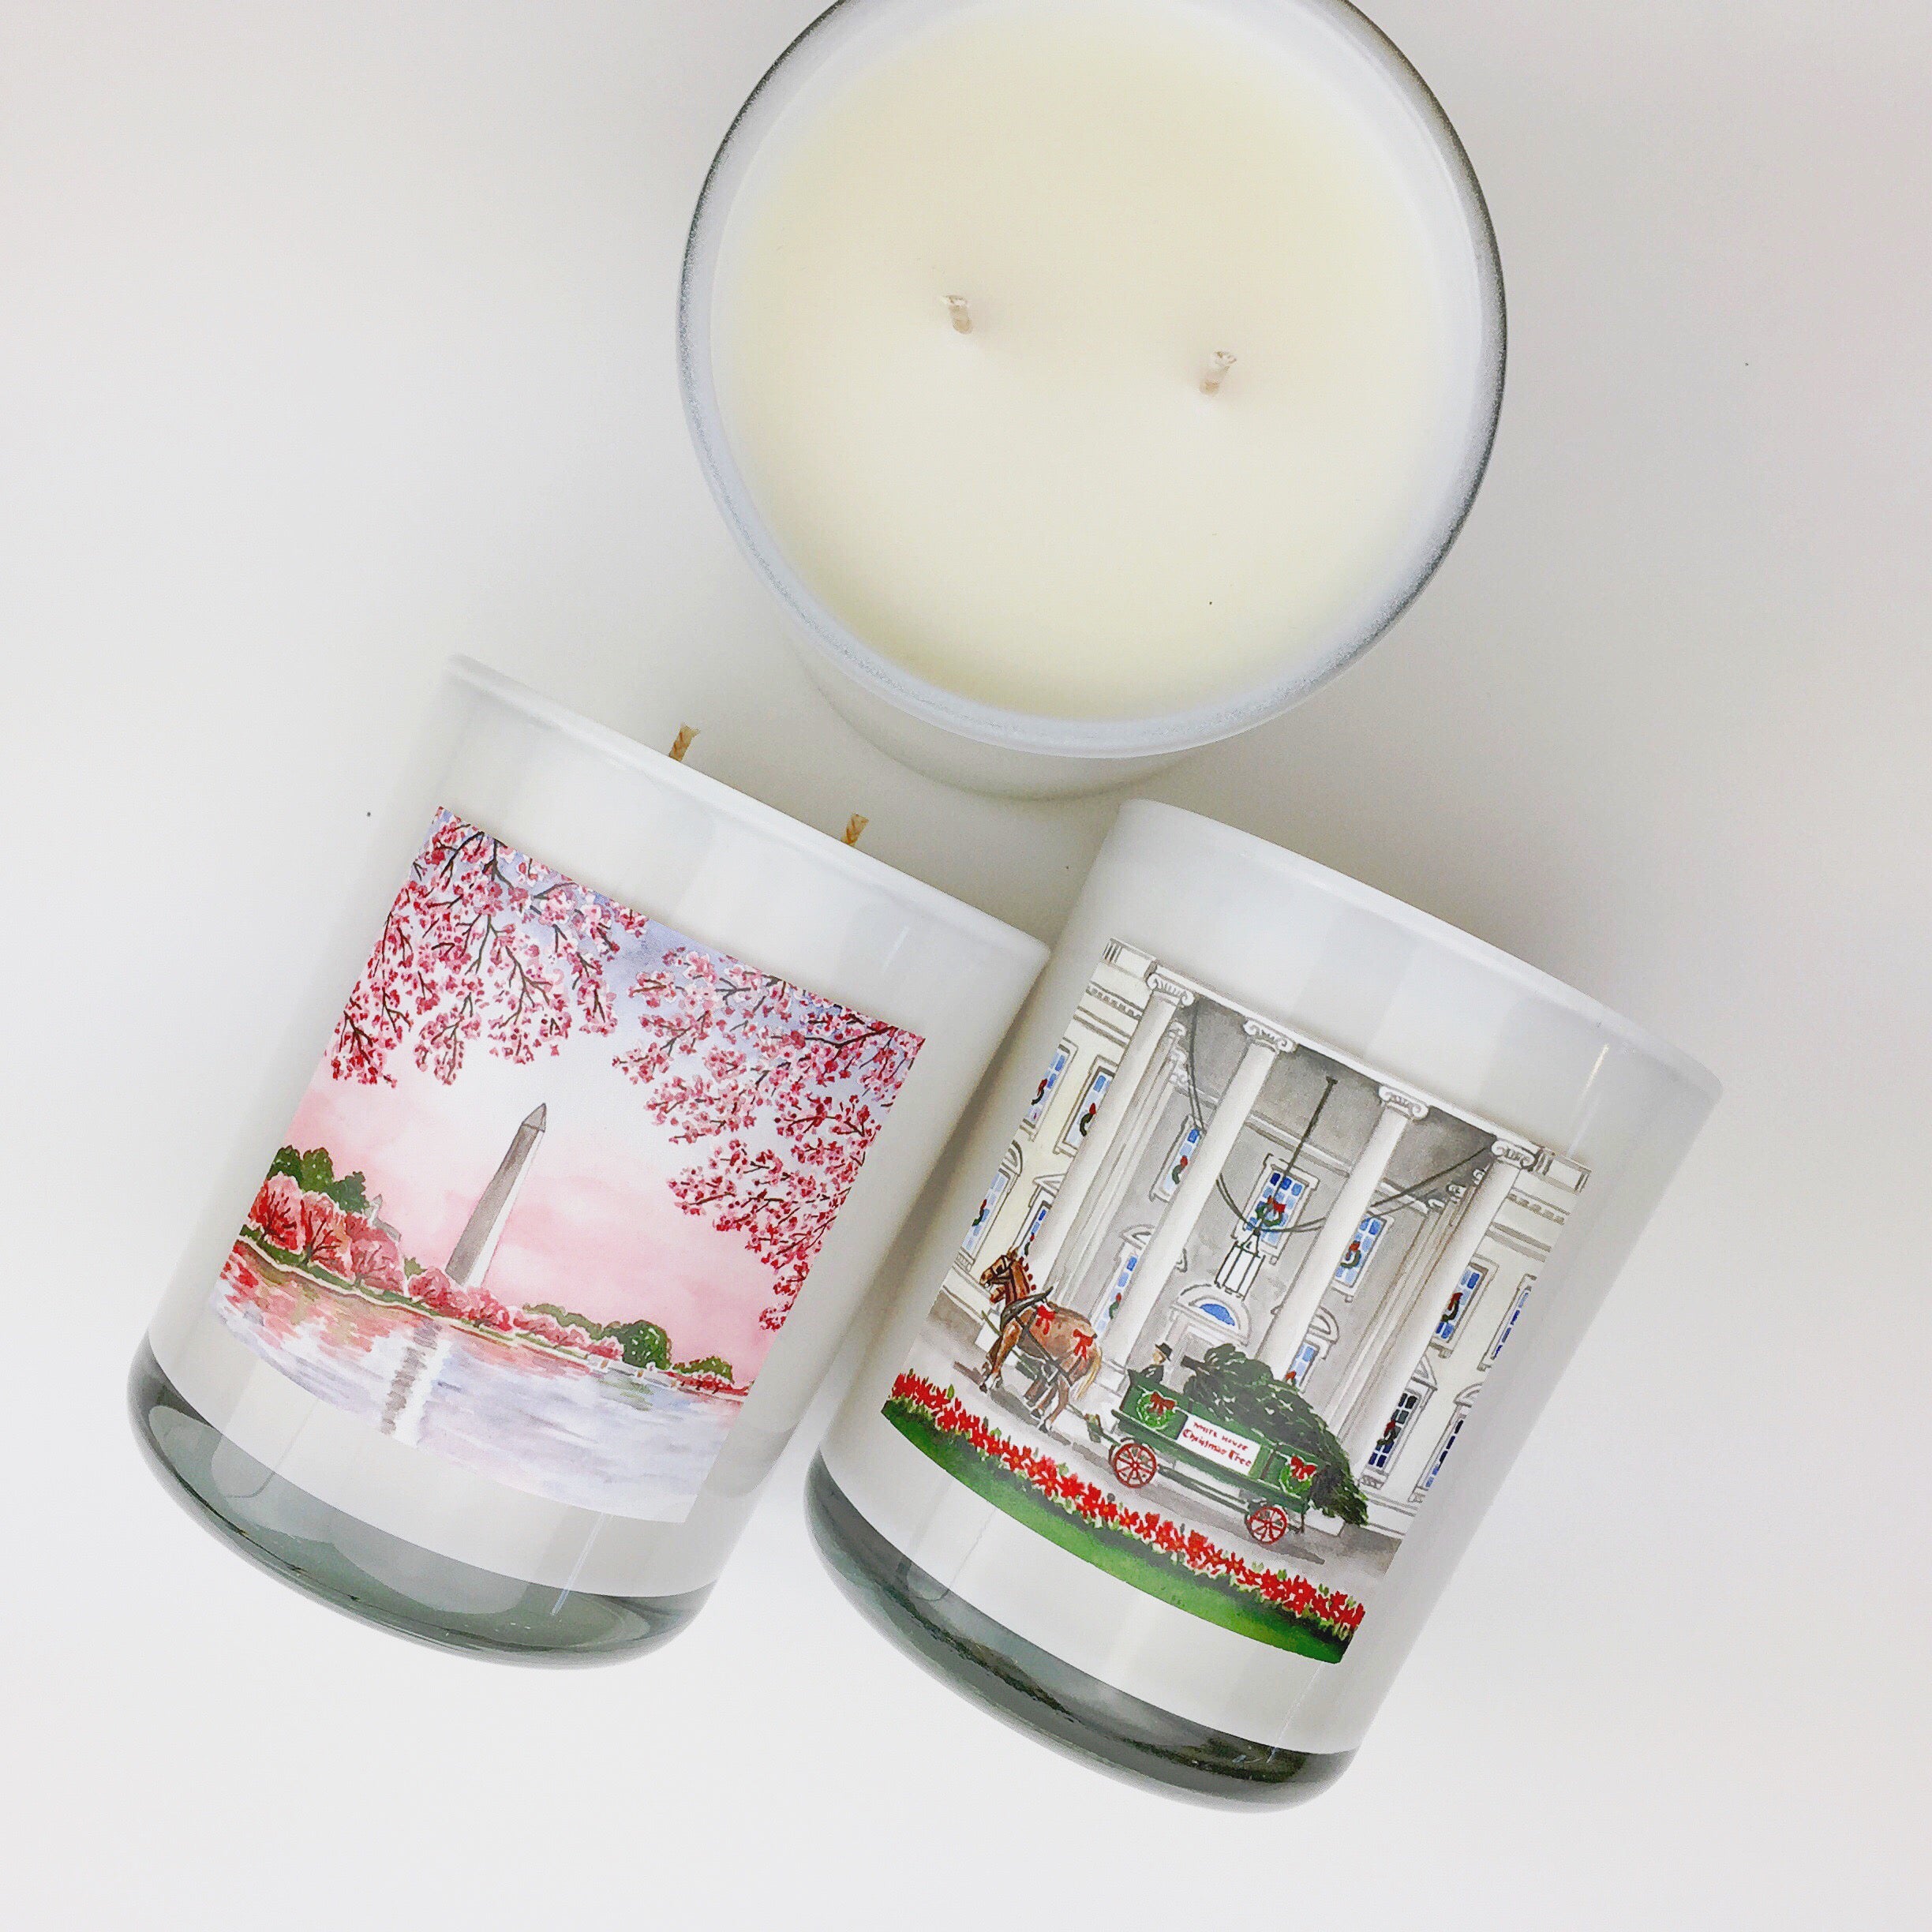 CHERRY BLOSSOM FESTIVAL. Japanese Cherry Blossom Coconut Wax Blend Candle.